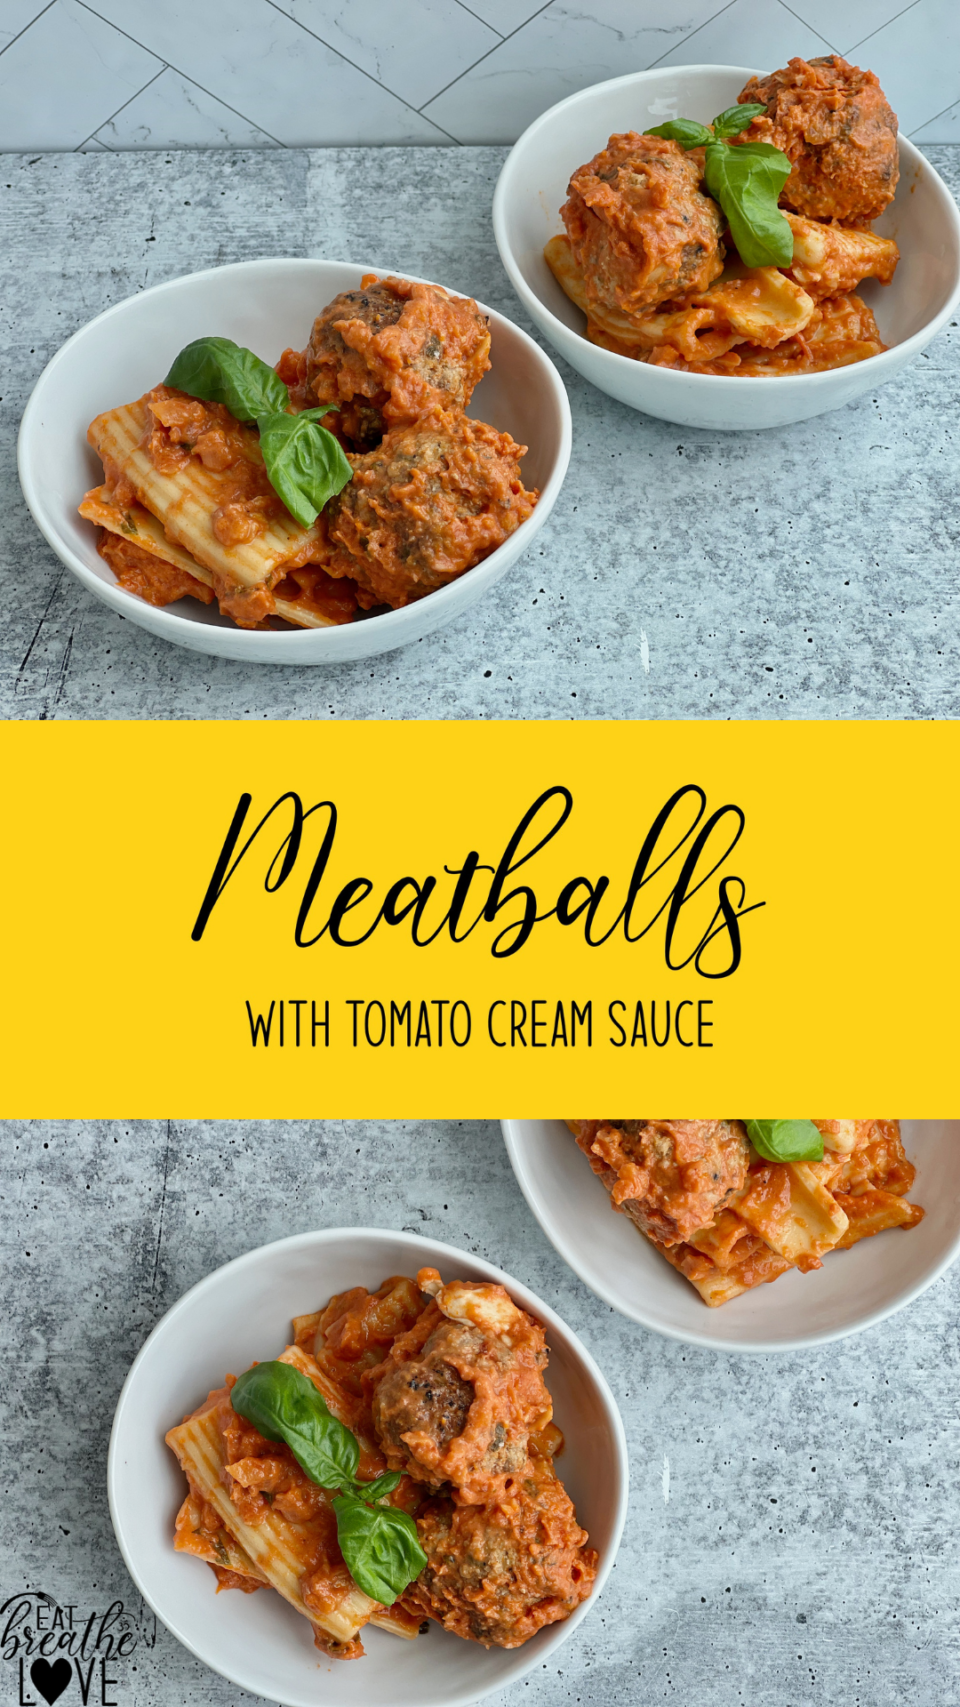 A bowl of pasta and meatballs